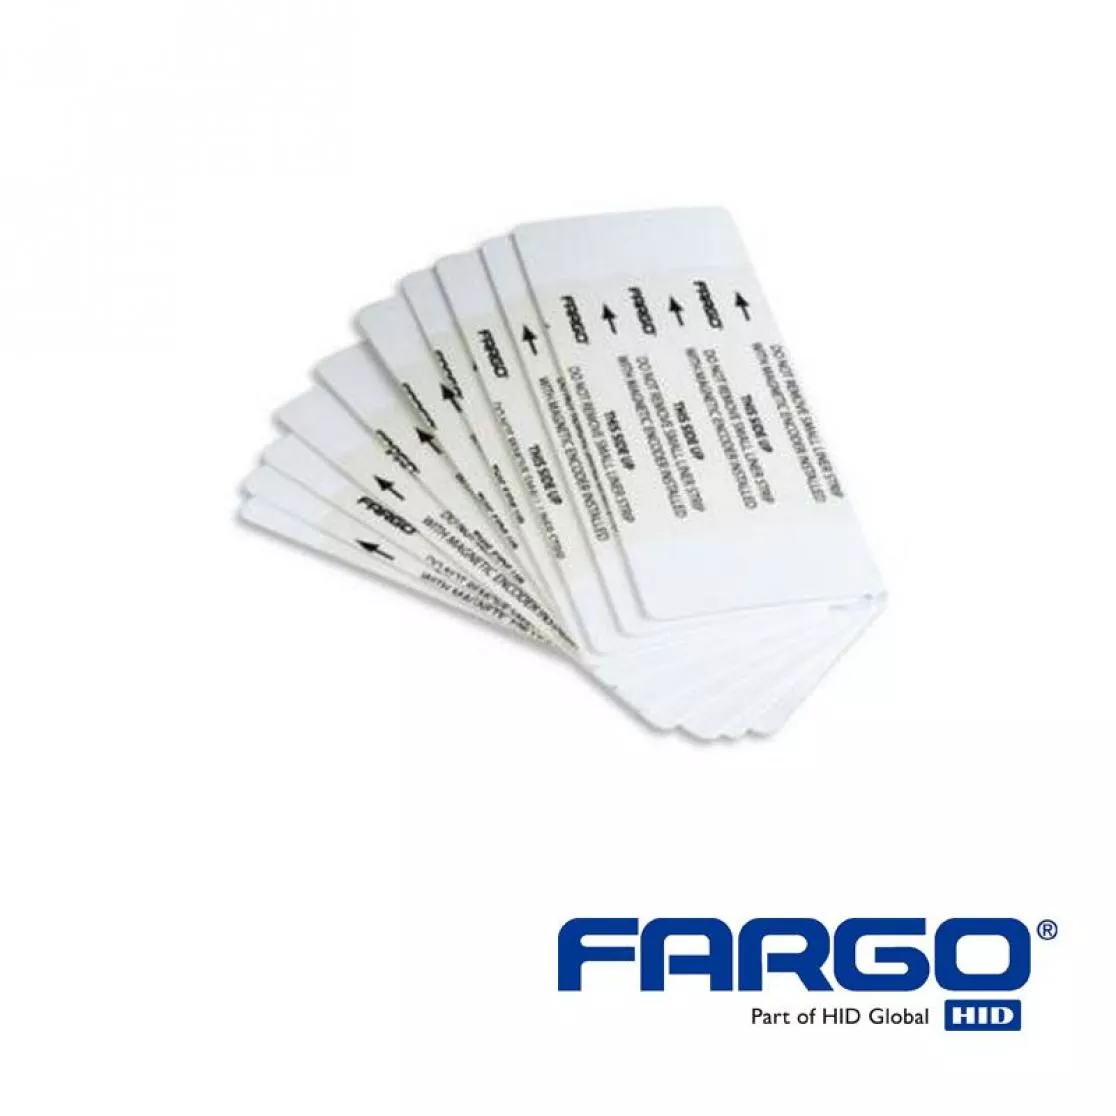 Cleaning cards double-sided for hid fargo HDP8500 card printer